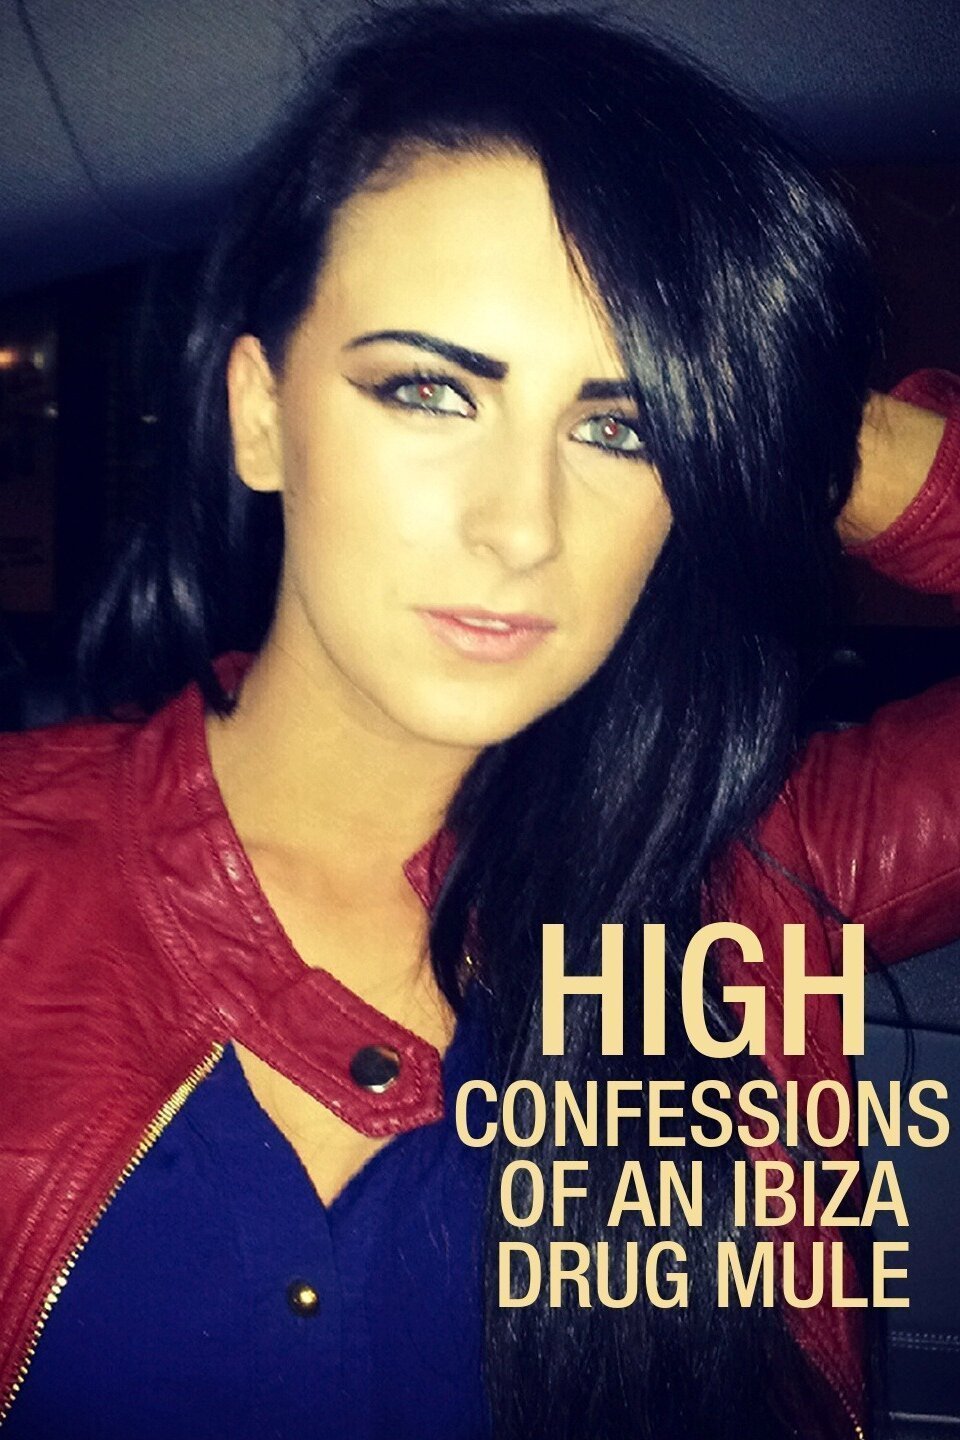 Poster of the movie High: Confessions of an Ibiza Drug Mule